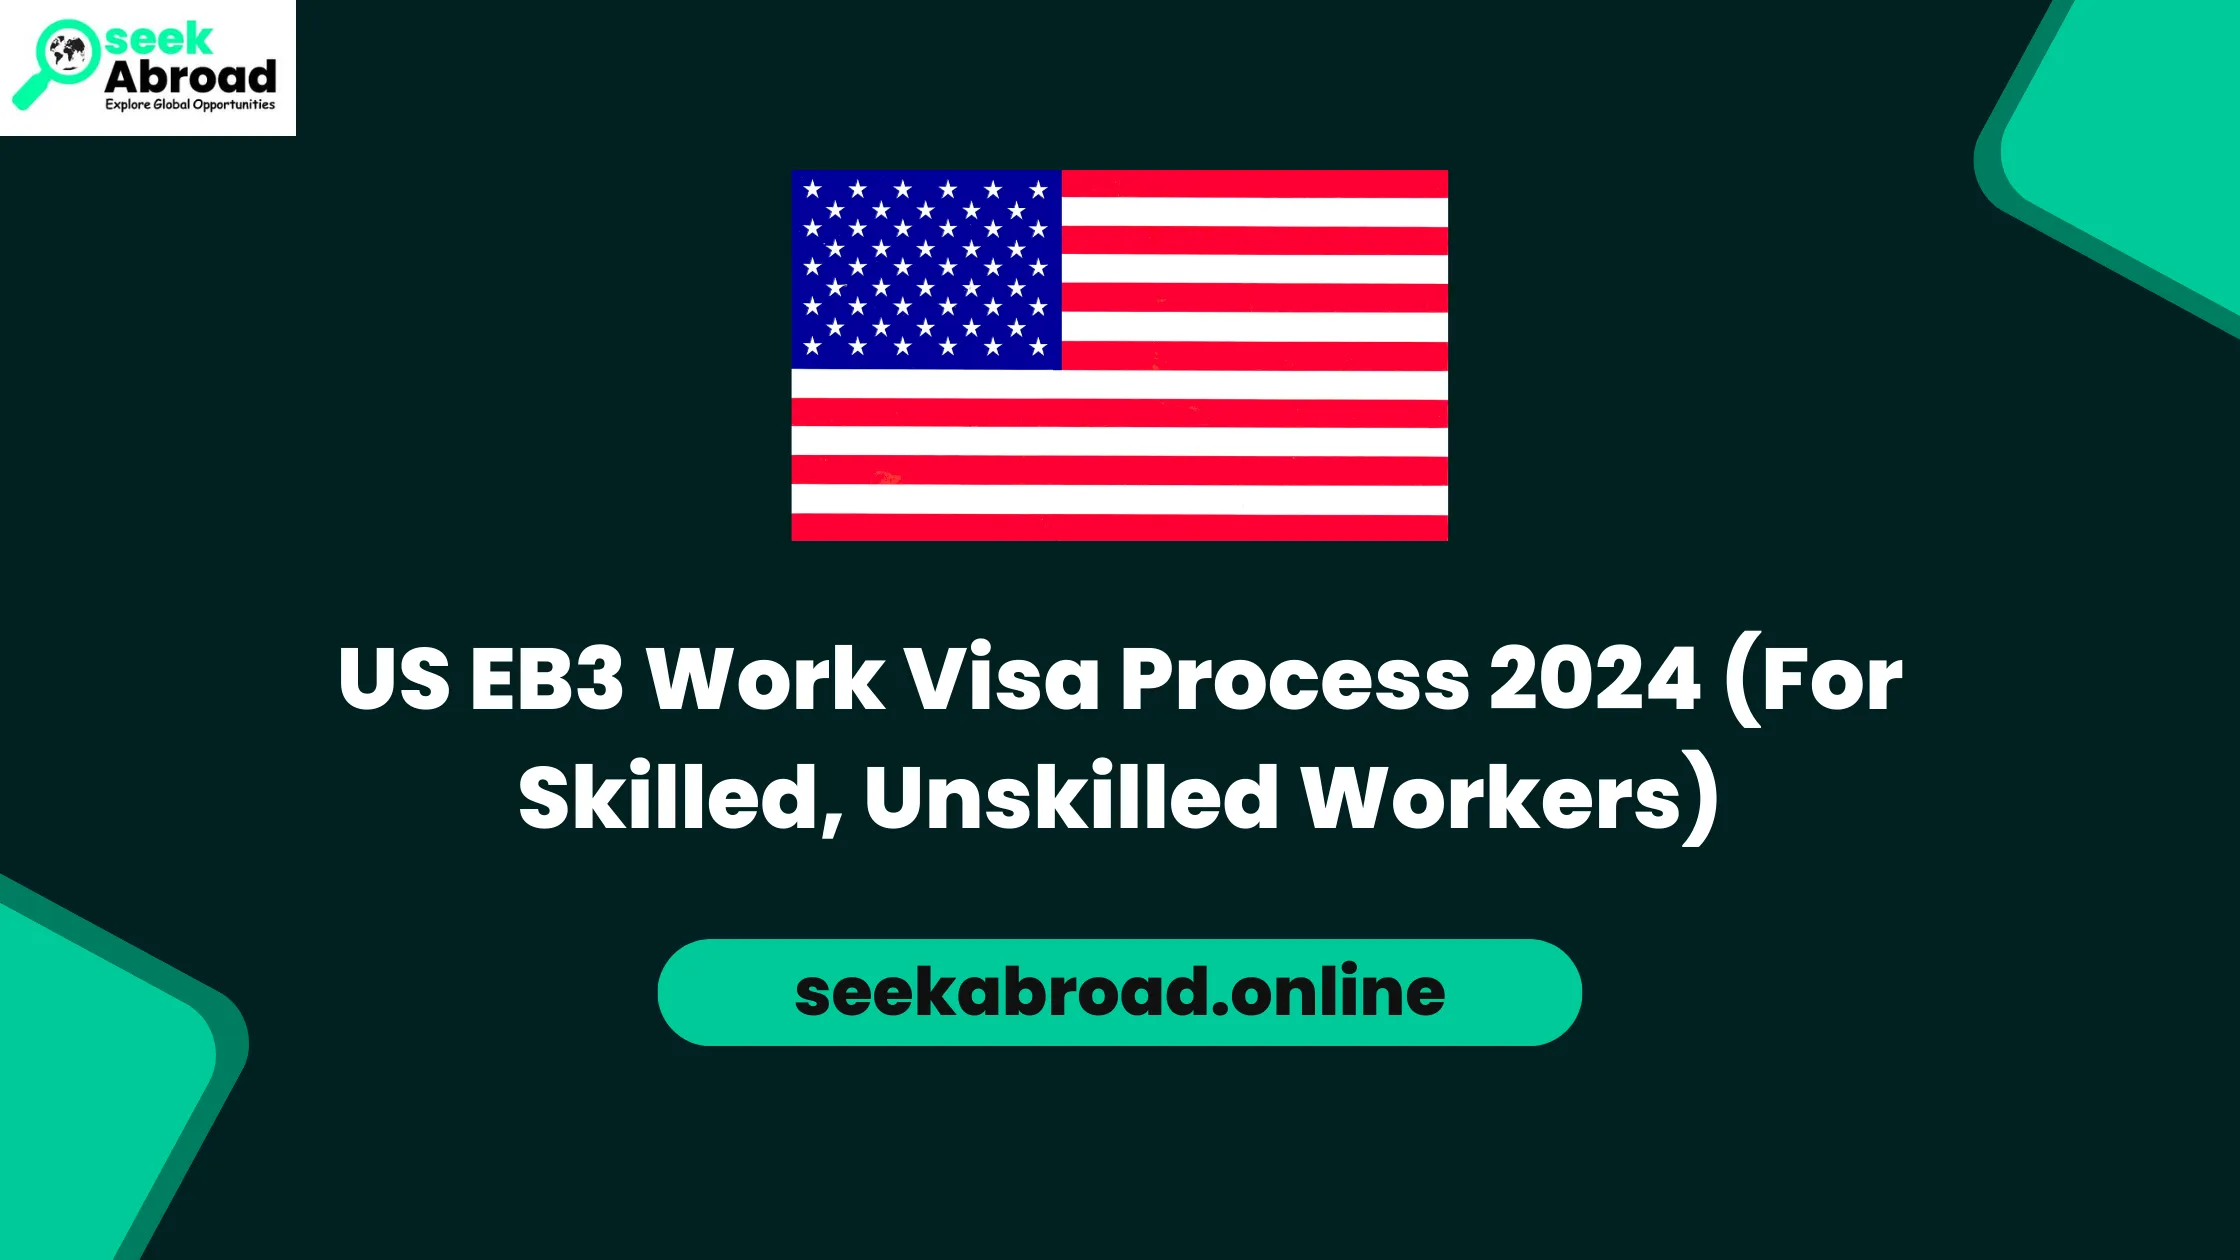 US EB3 Work Visa Process 2024 For Skilled, Unskilled Workers